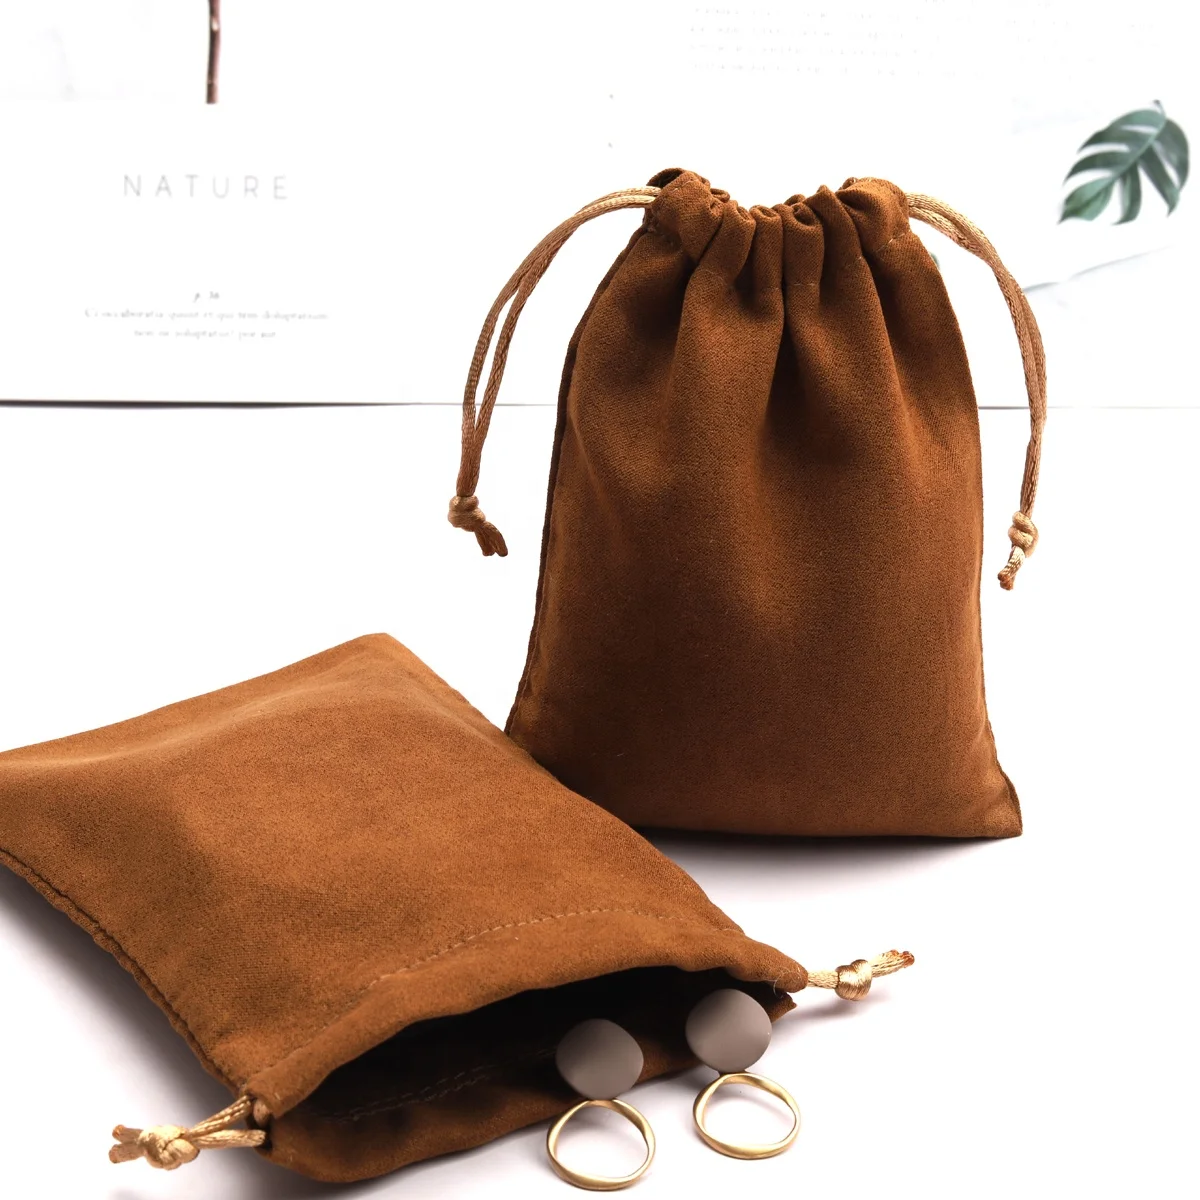 High End Brown Suede Jewelry Perfume Gift Packing Bag Luxury Watch Sunglasses Storage Velvet Drawstring Suede Pouch